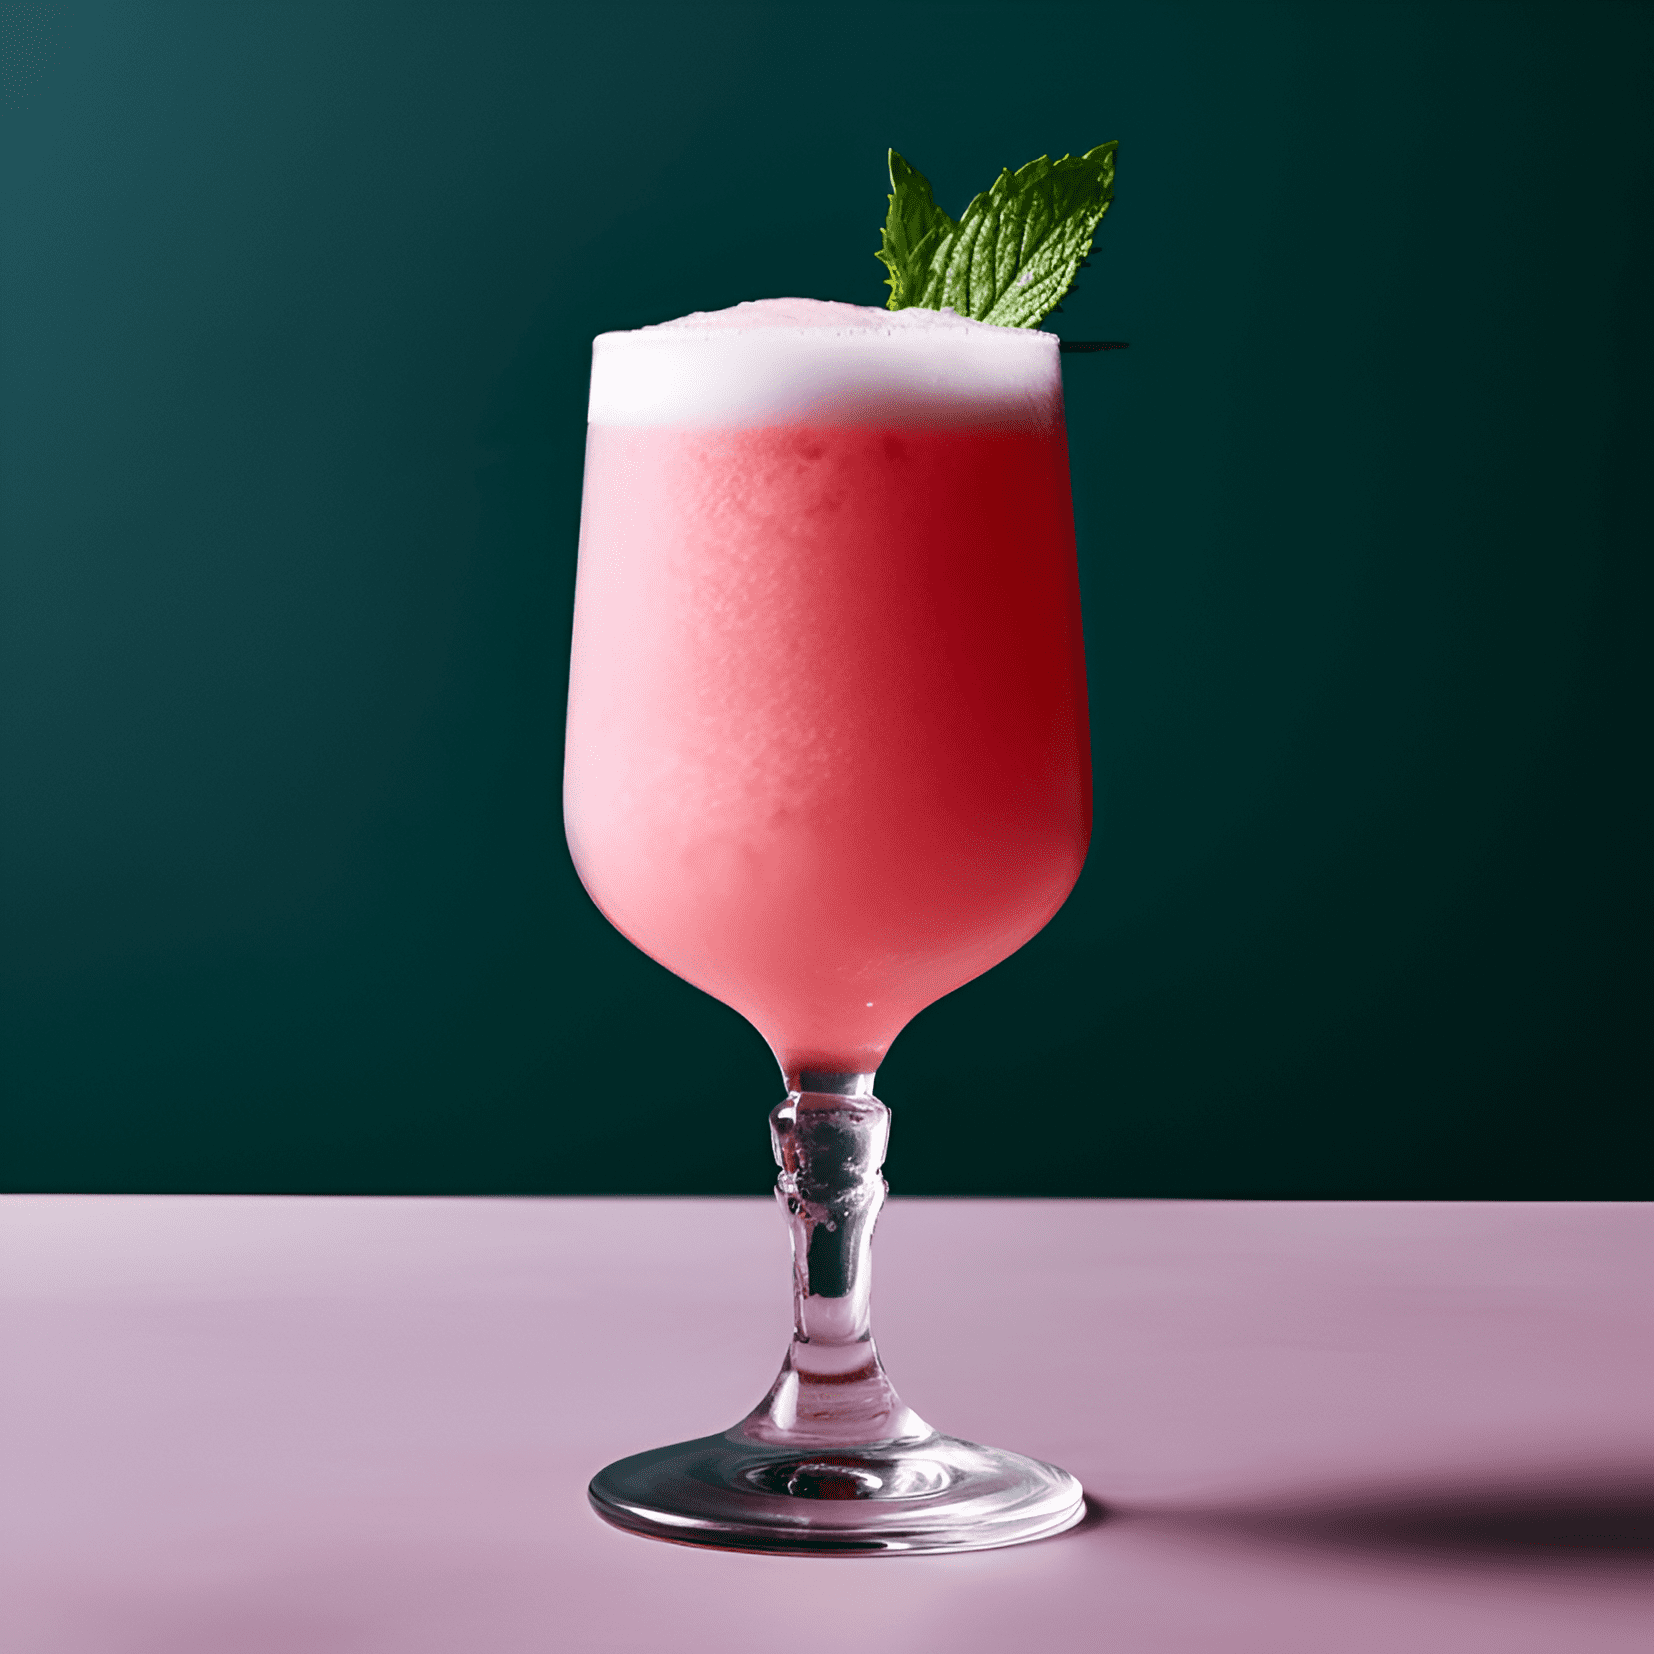 Watermelon Cocktail Recipe - The Watermelon Cocktail has a refreshing, sweet, and slightly tangy taste. The natural sweetness of the watermelon is balanced by the tartness of the lime and the slight bitterness of the mint. The overall flavor is light and fruity, making it a perfect thirst-quencher.